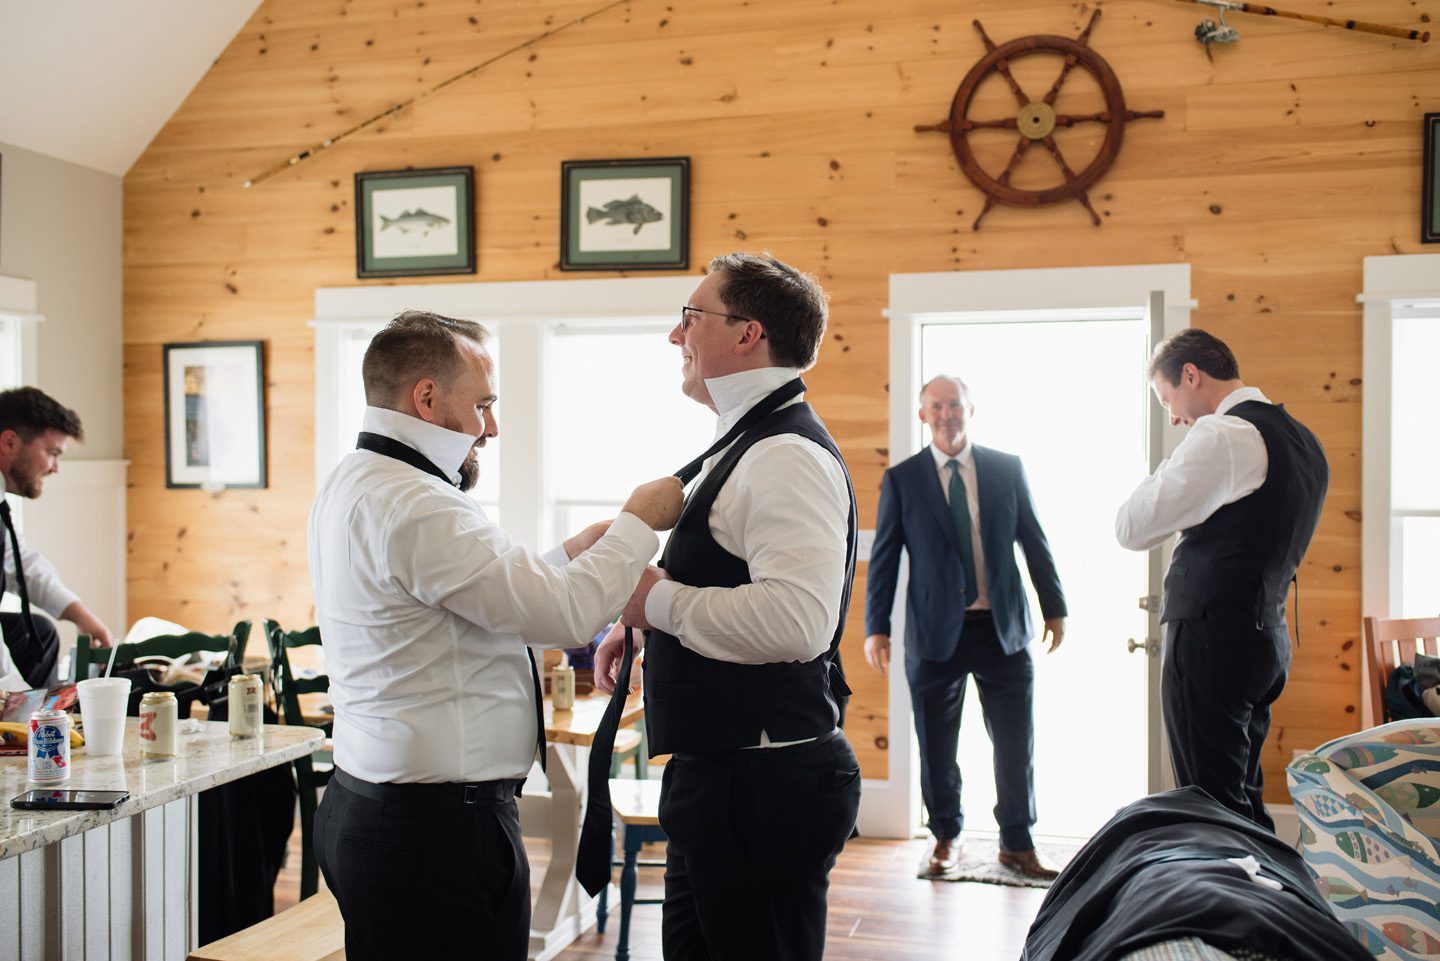 Groom and groomsmen getting ready for the wedding